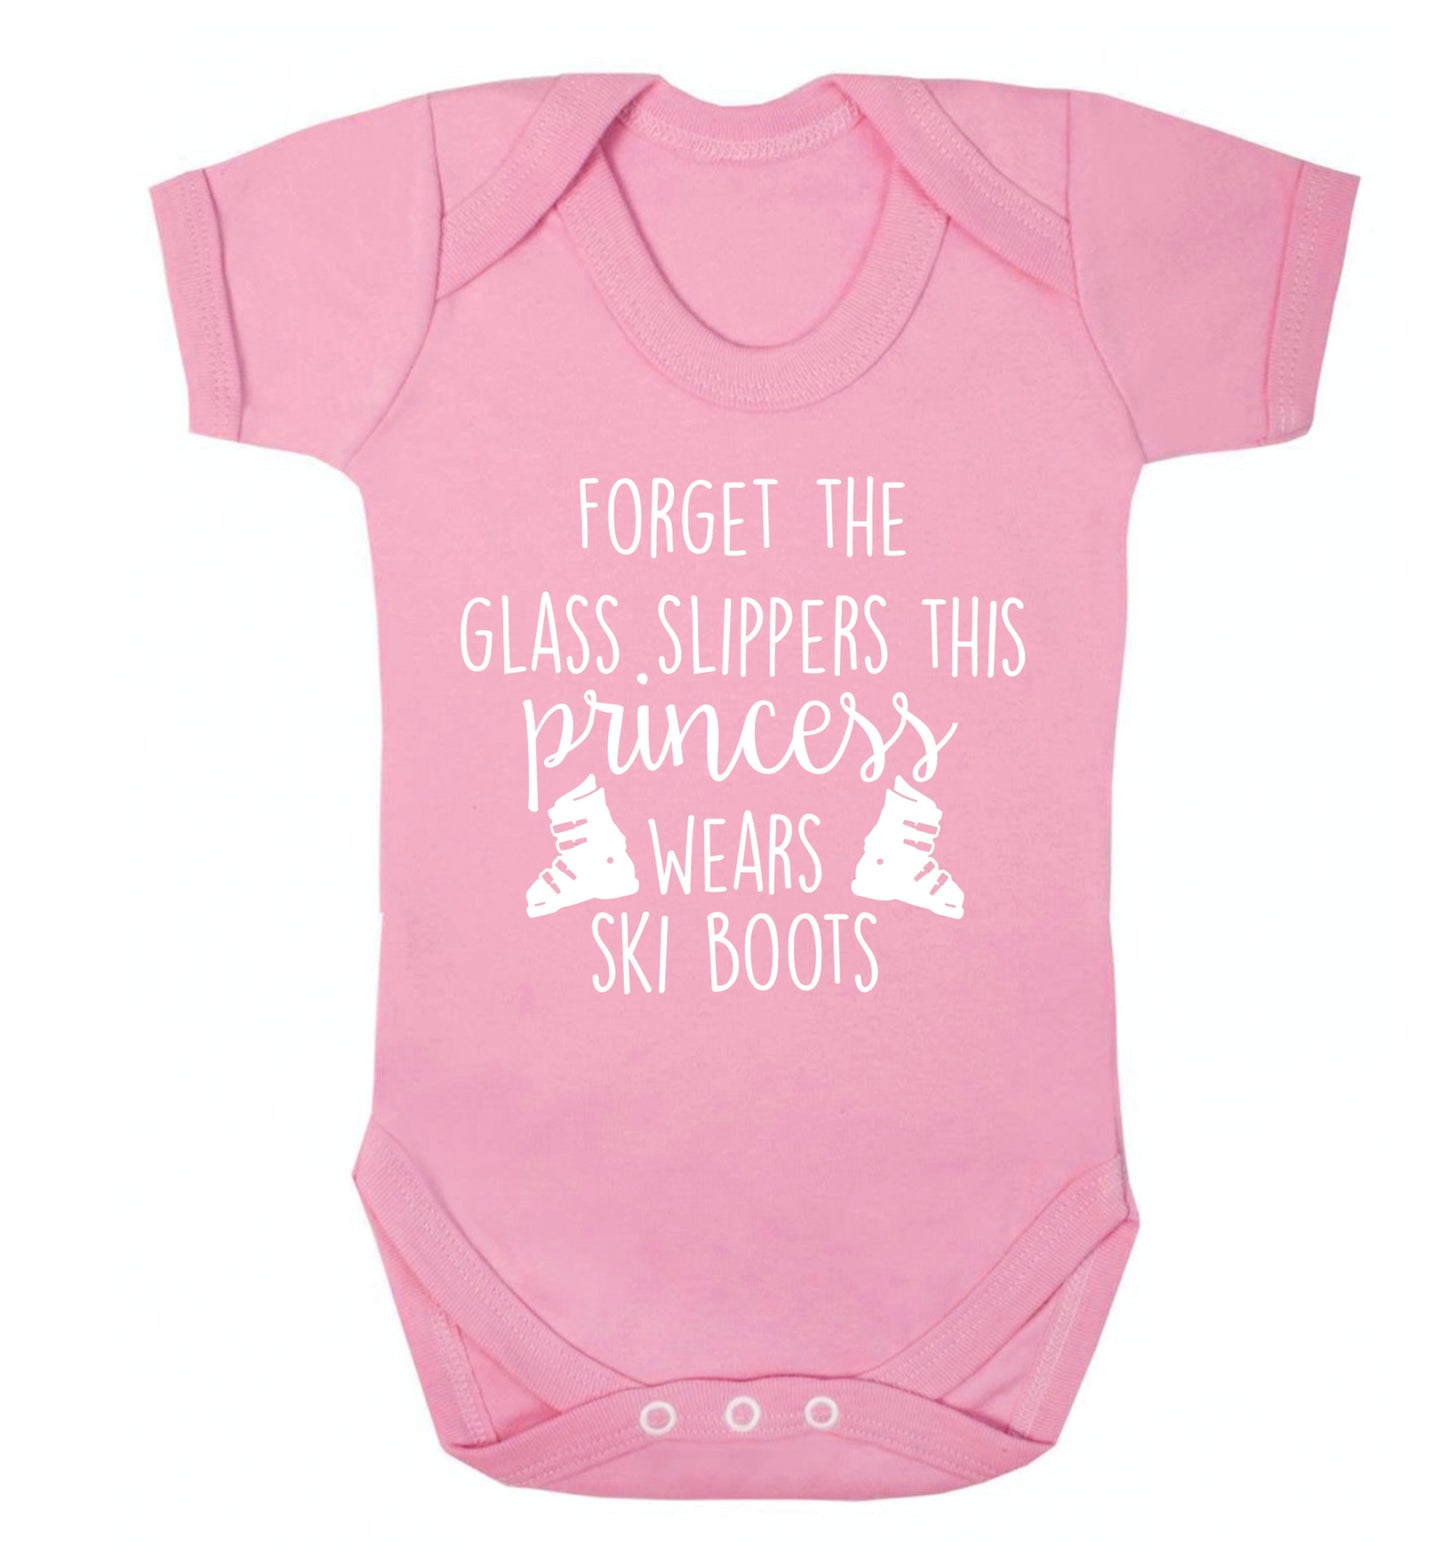 Forget the glass slippers this princess wears ski boots Baby Vest pale pink 18-24 months